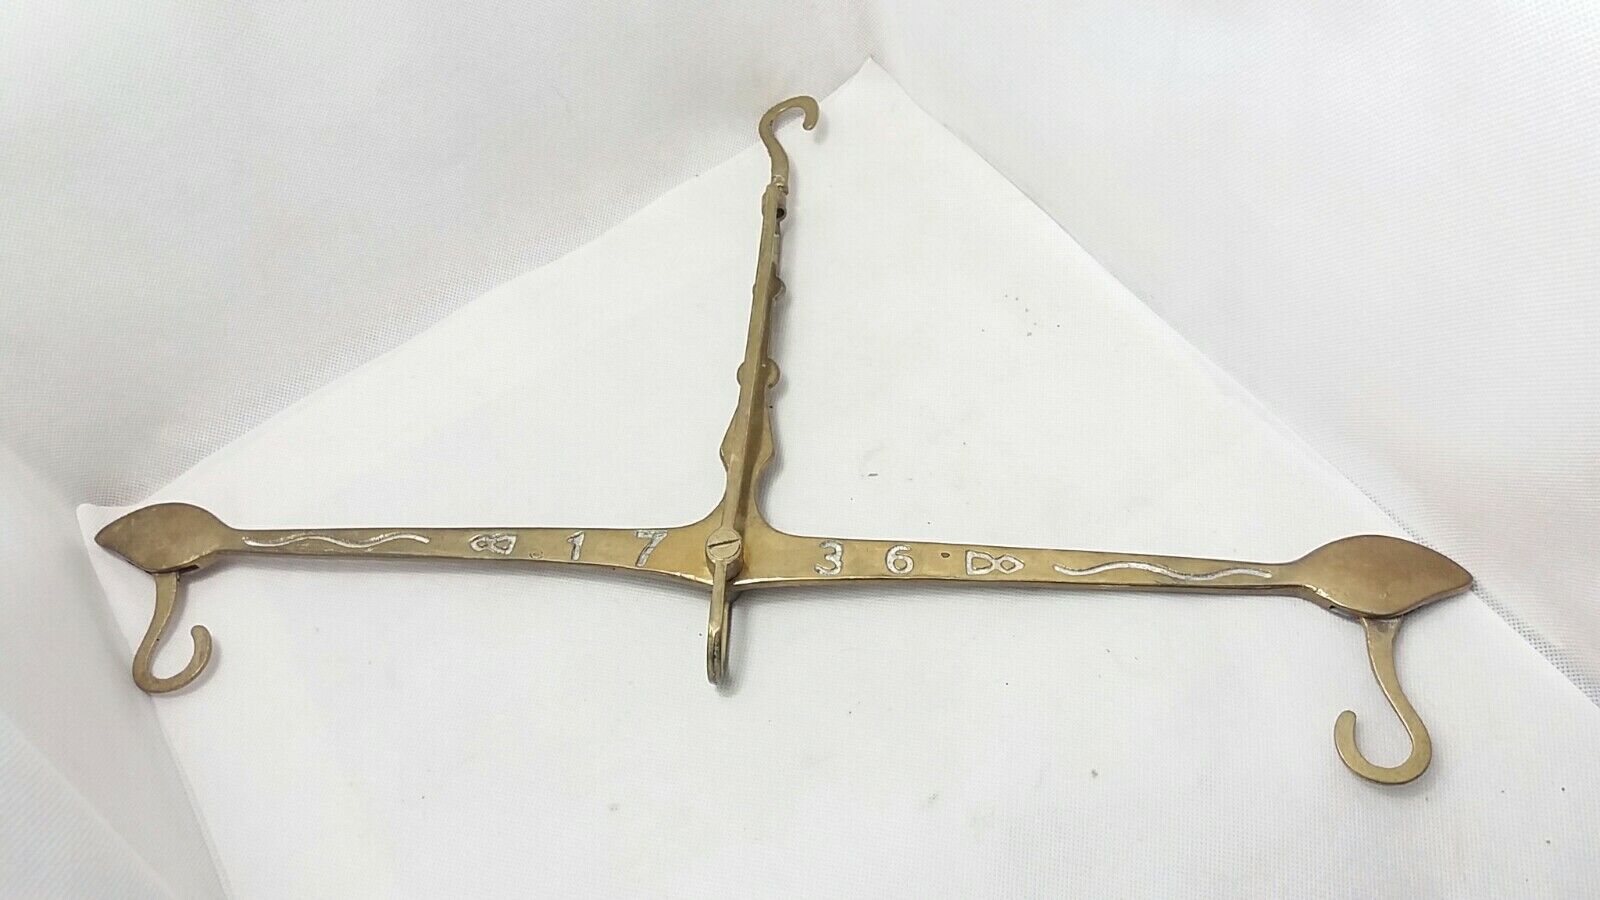 Antique Brass Hanging Equal Arm Balance Scales dated 1736 